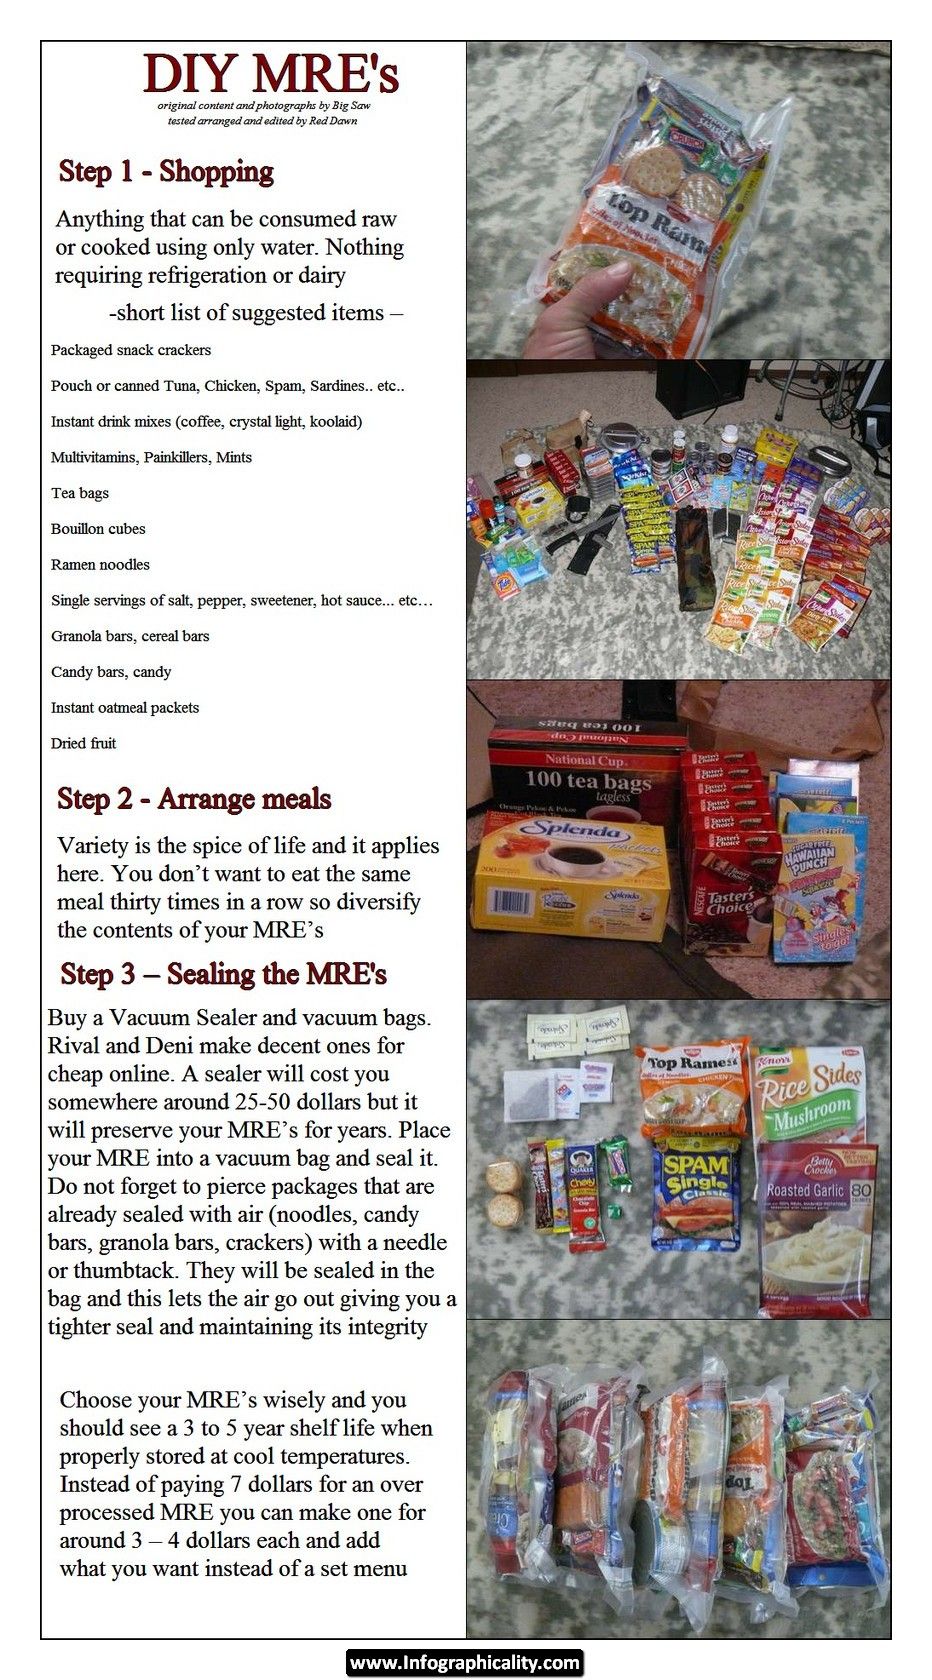 diy mre for preppers infographic